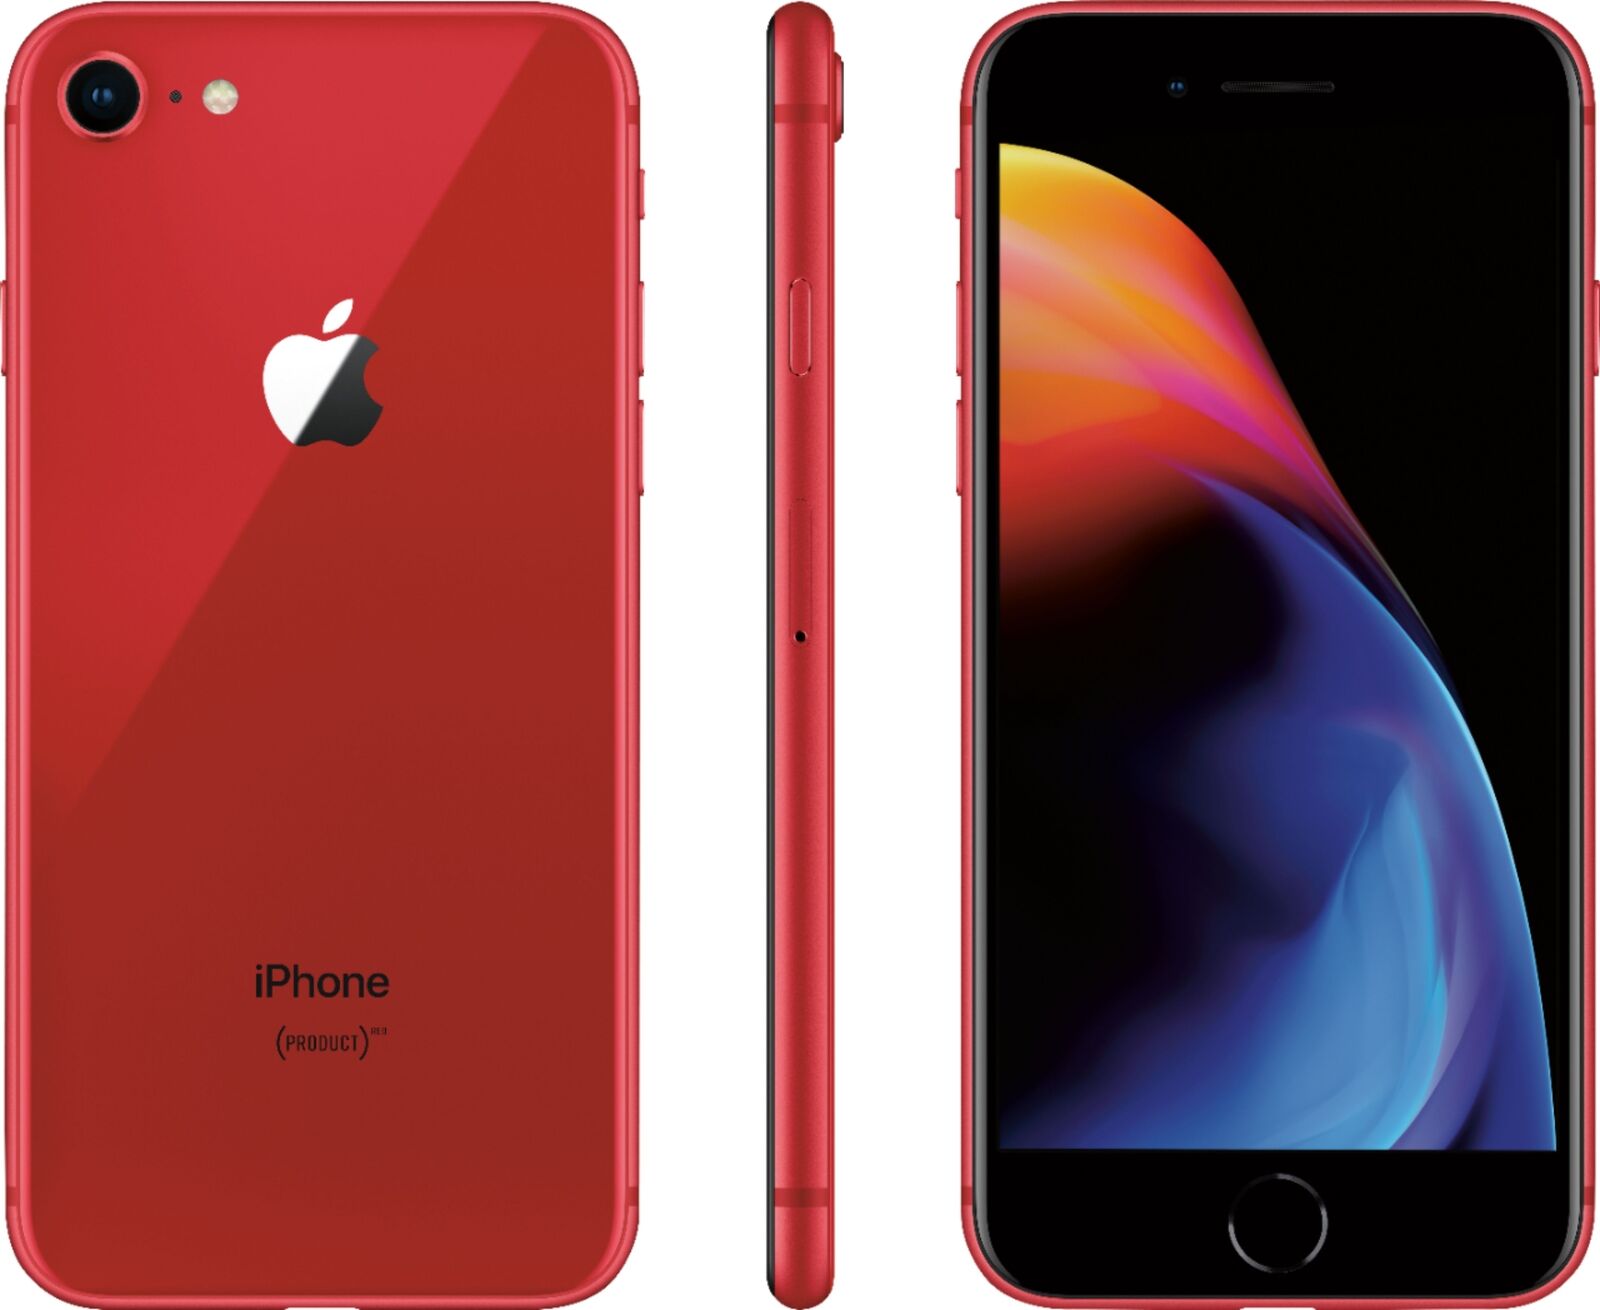 Apple iPhone 8 (PRODUCT)RED - 256GB - (Unlocked) A1863 (CDMA + GSM 